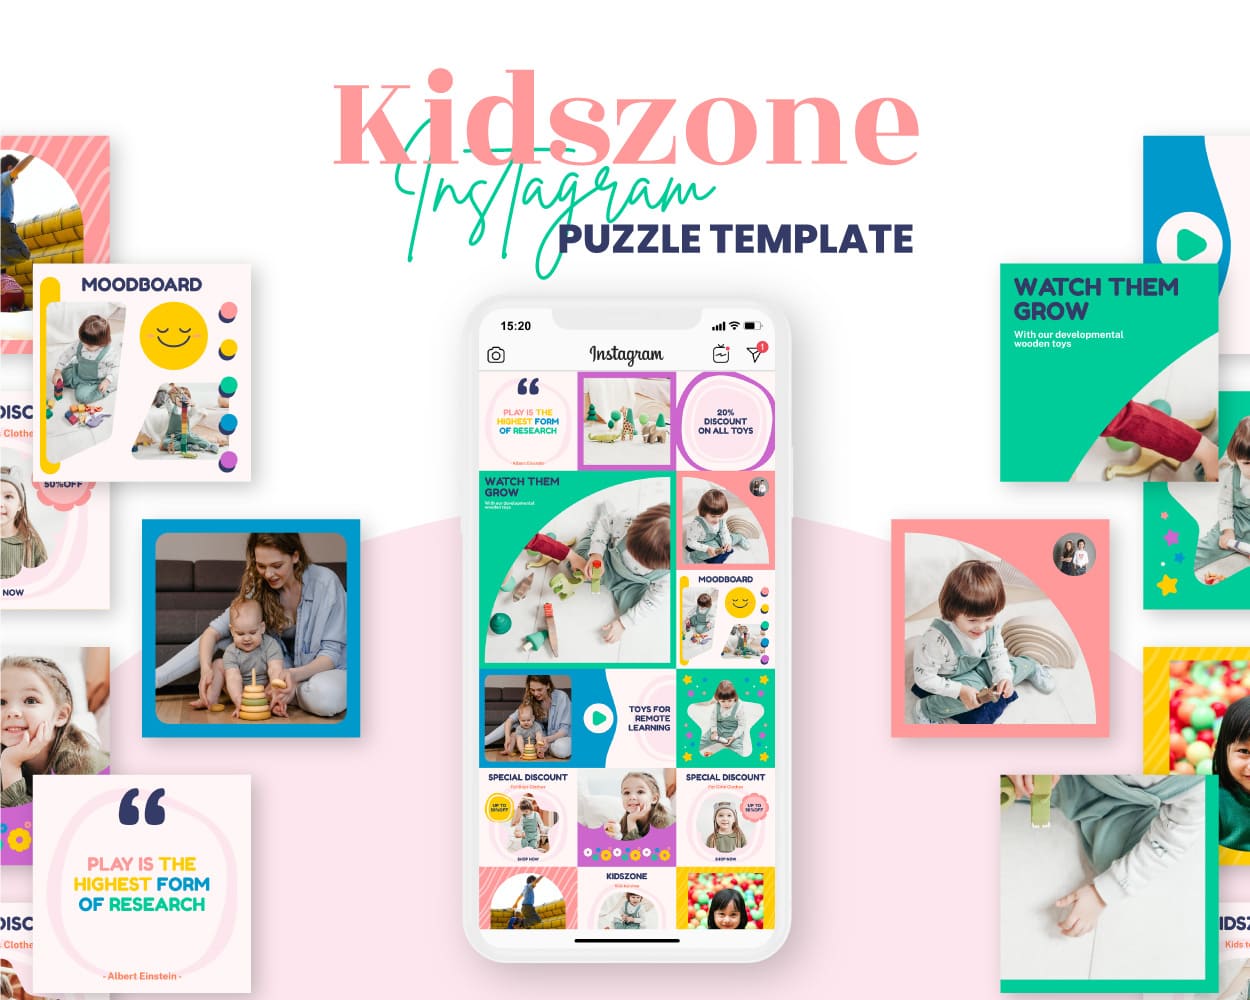 canva instagram puzzle template for kids business kidszone